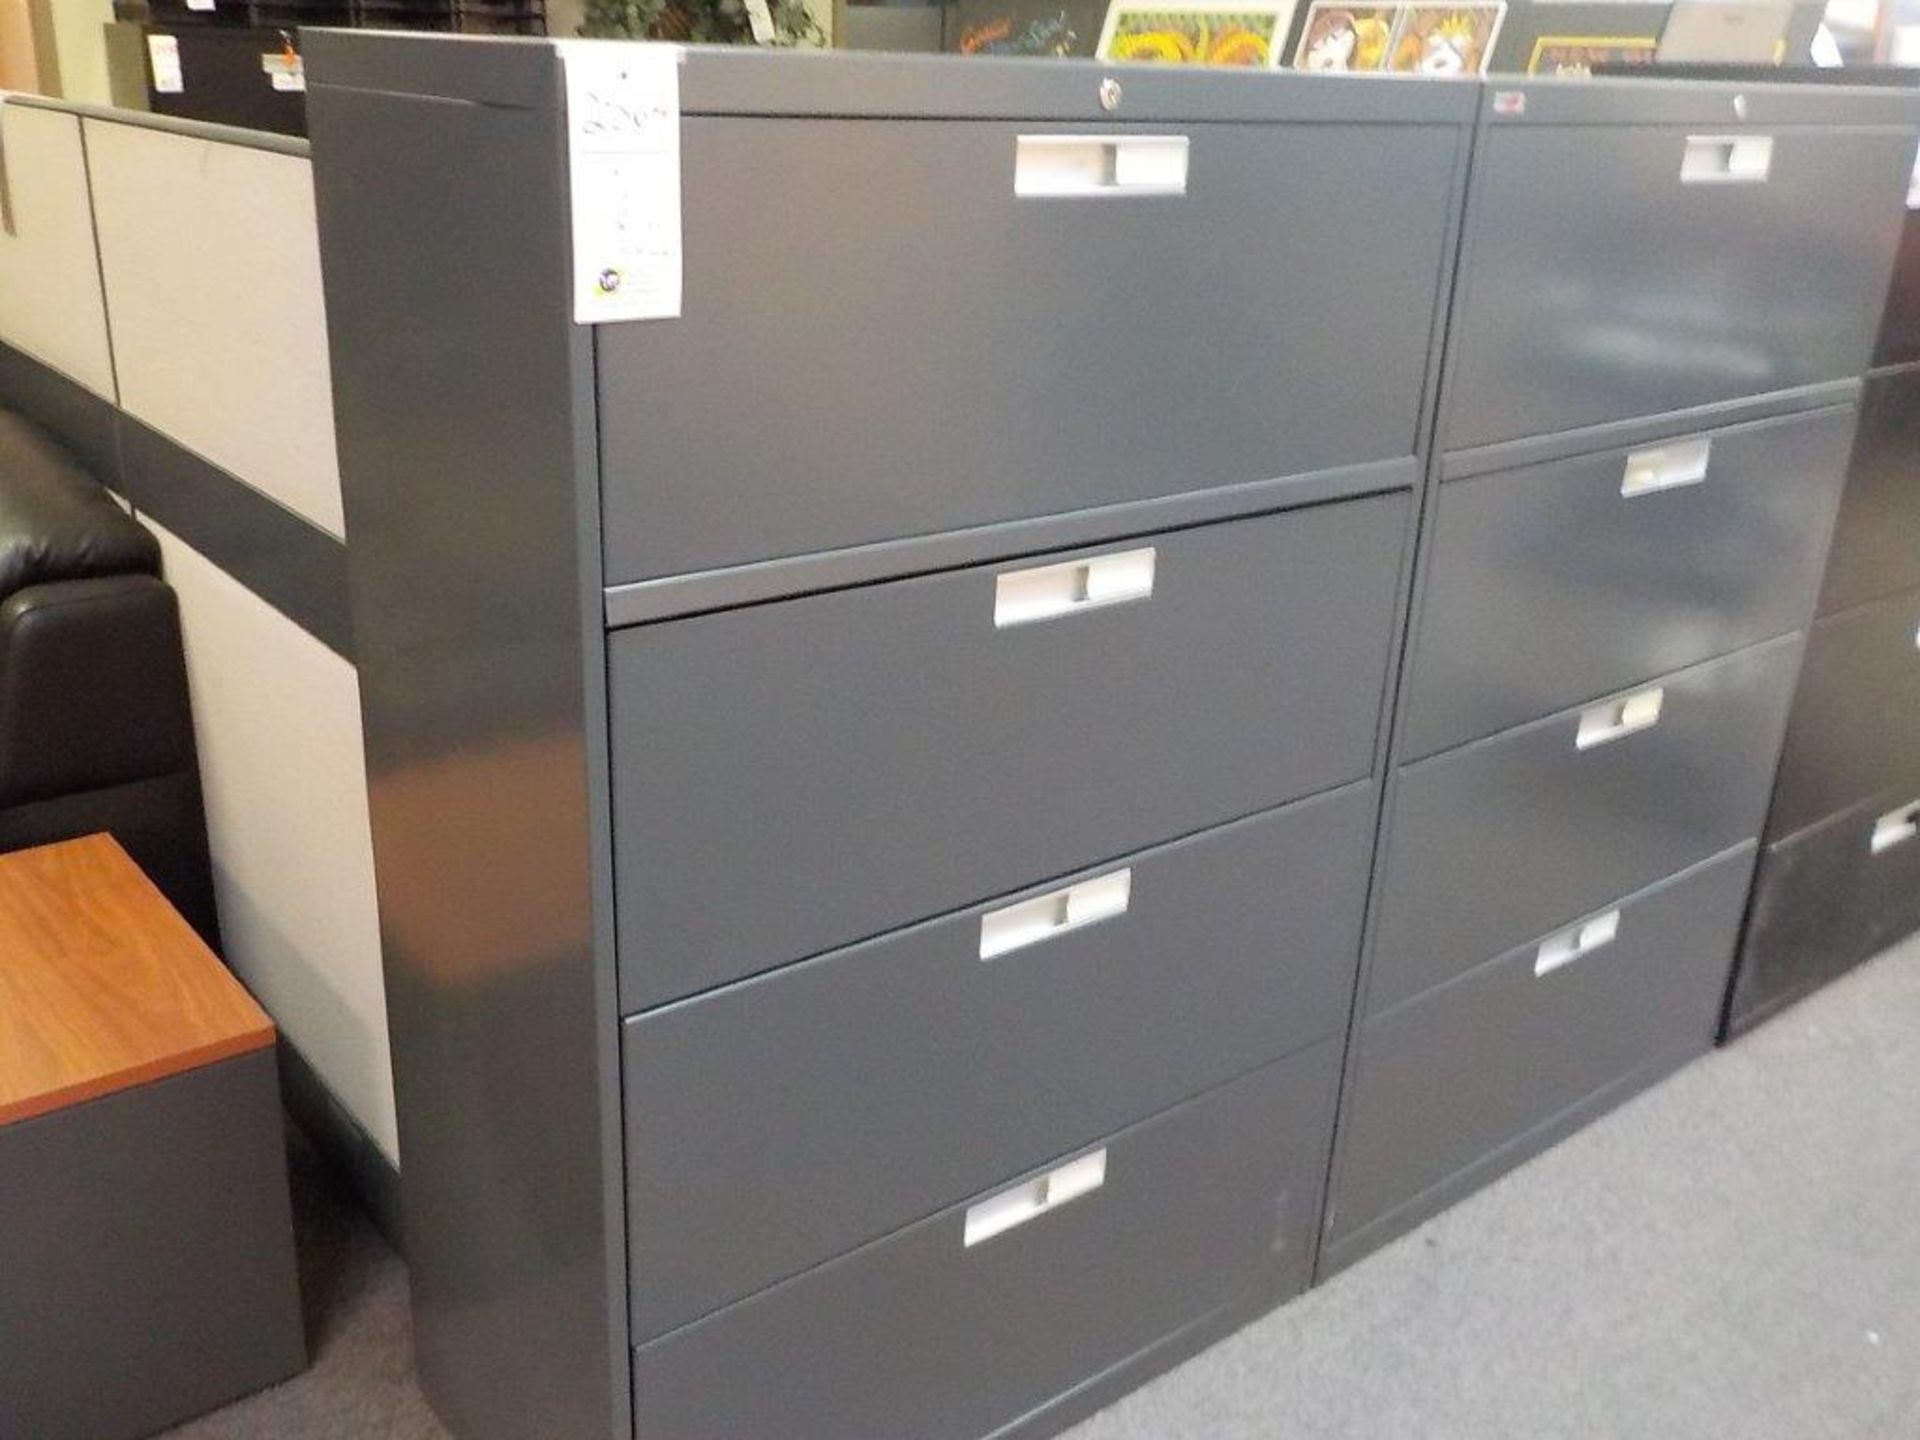 4-DRAWER LATERAL FILE CABINETS - Bild 2 aus 2